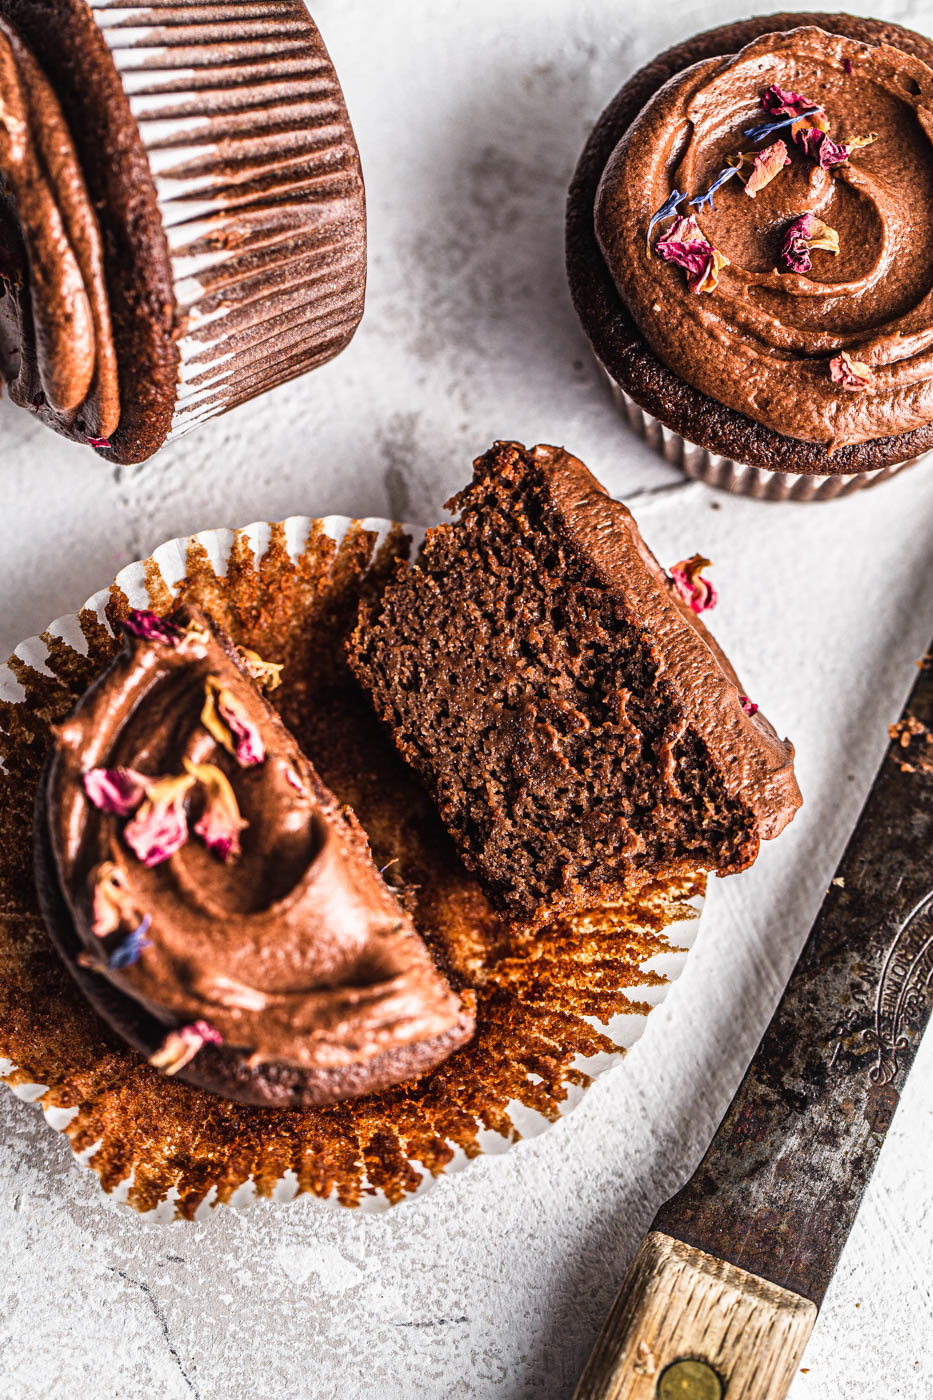 chocolate cupcakes cut in half with chocolate frosting and rose petals